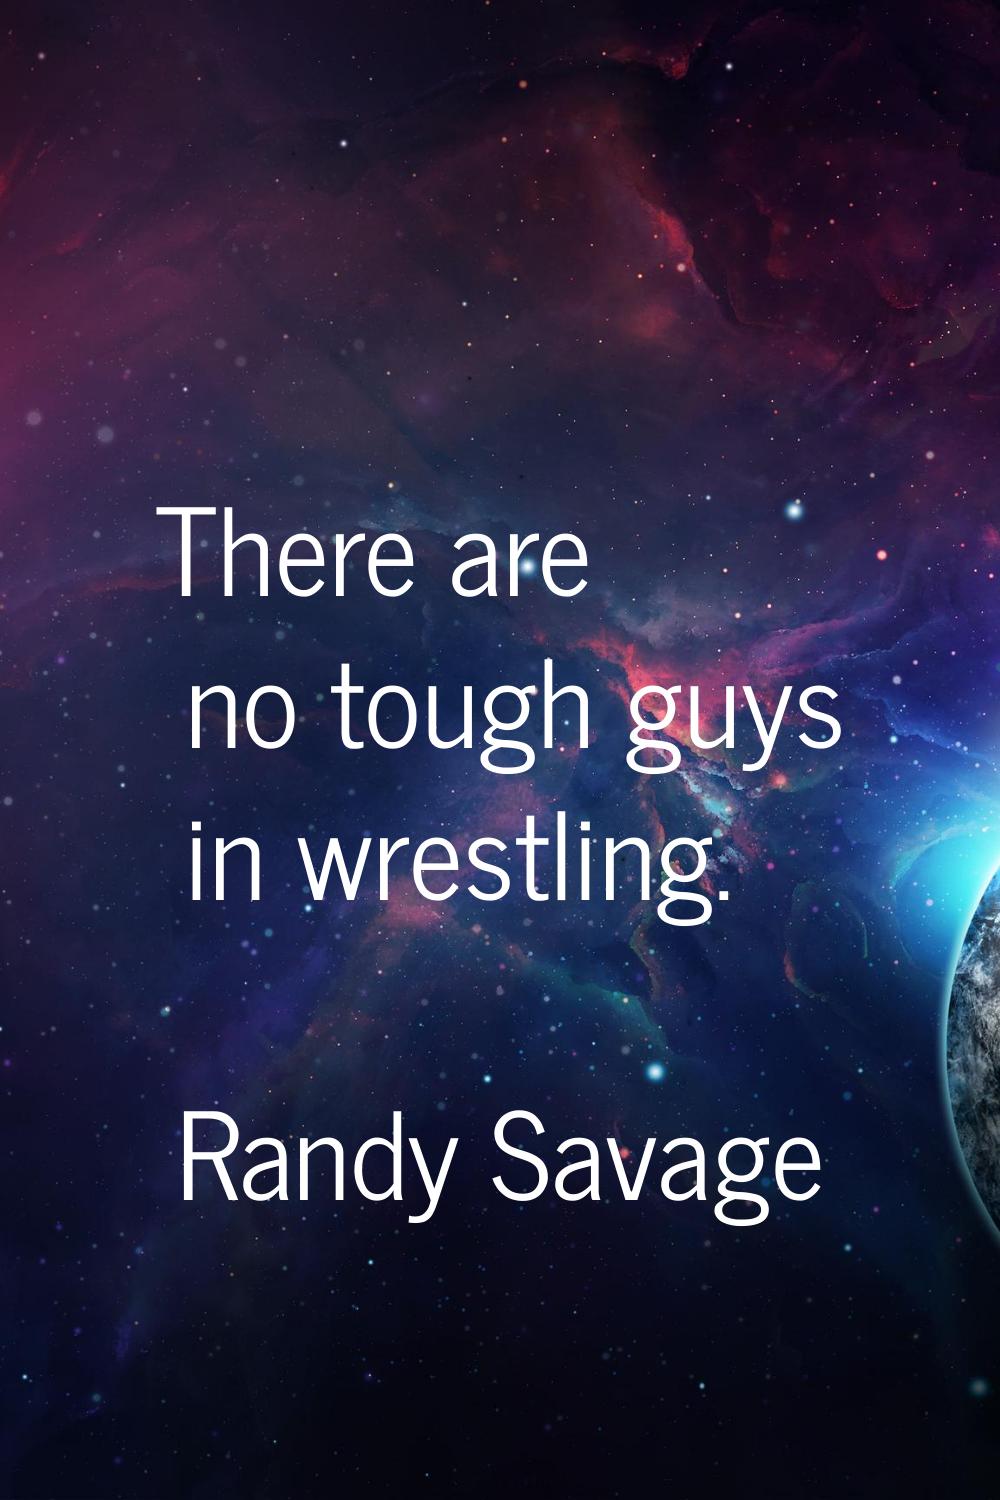 There are no tough guys in wrestling.